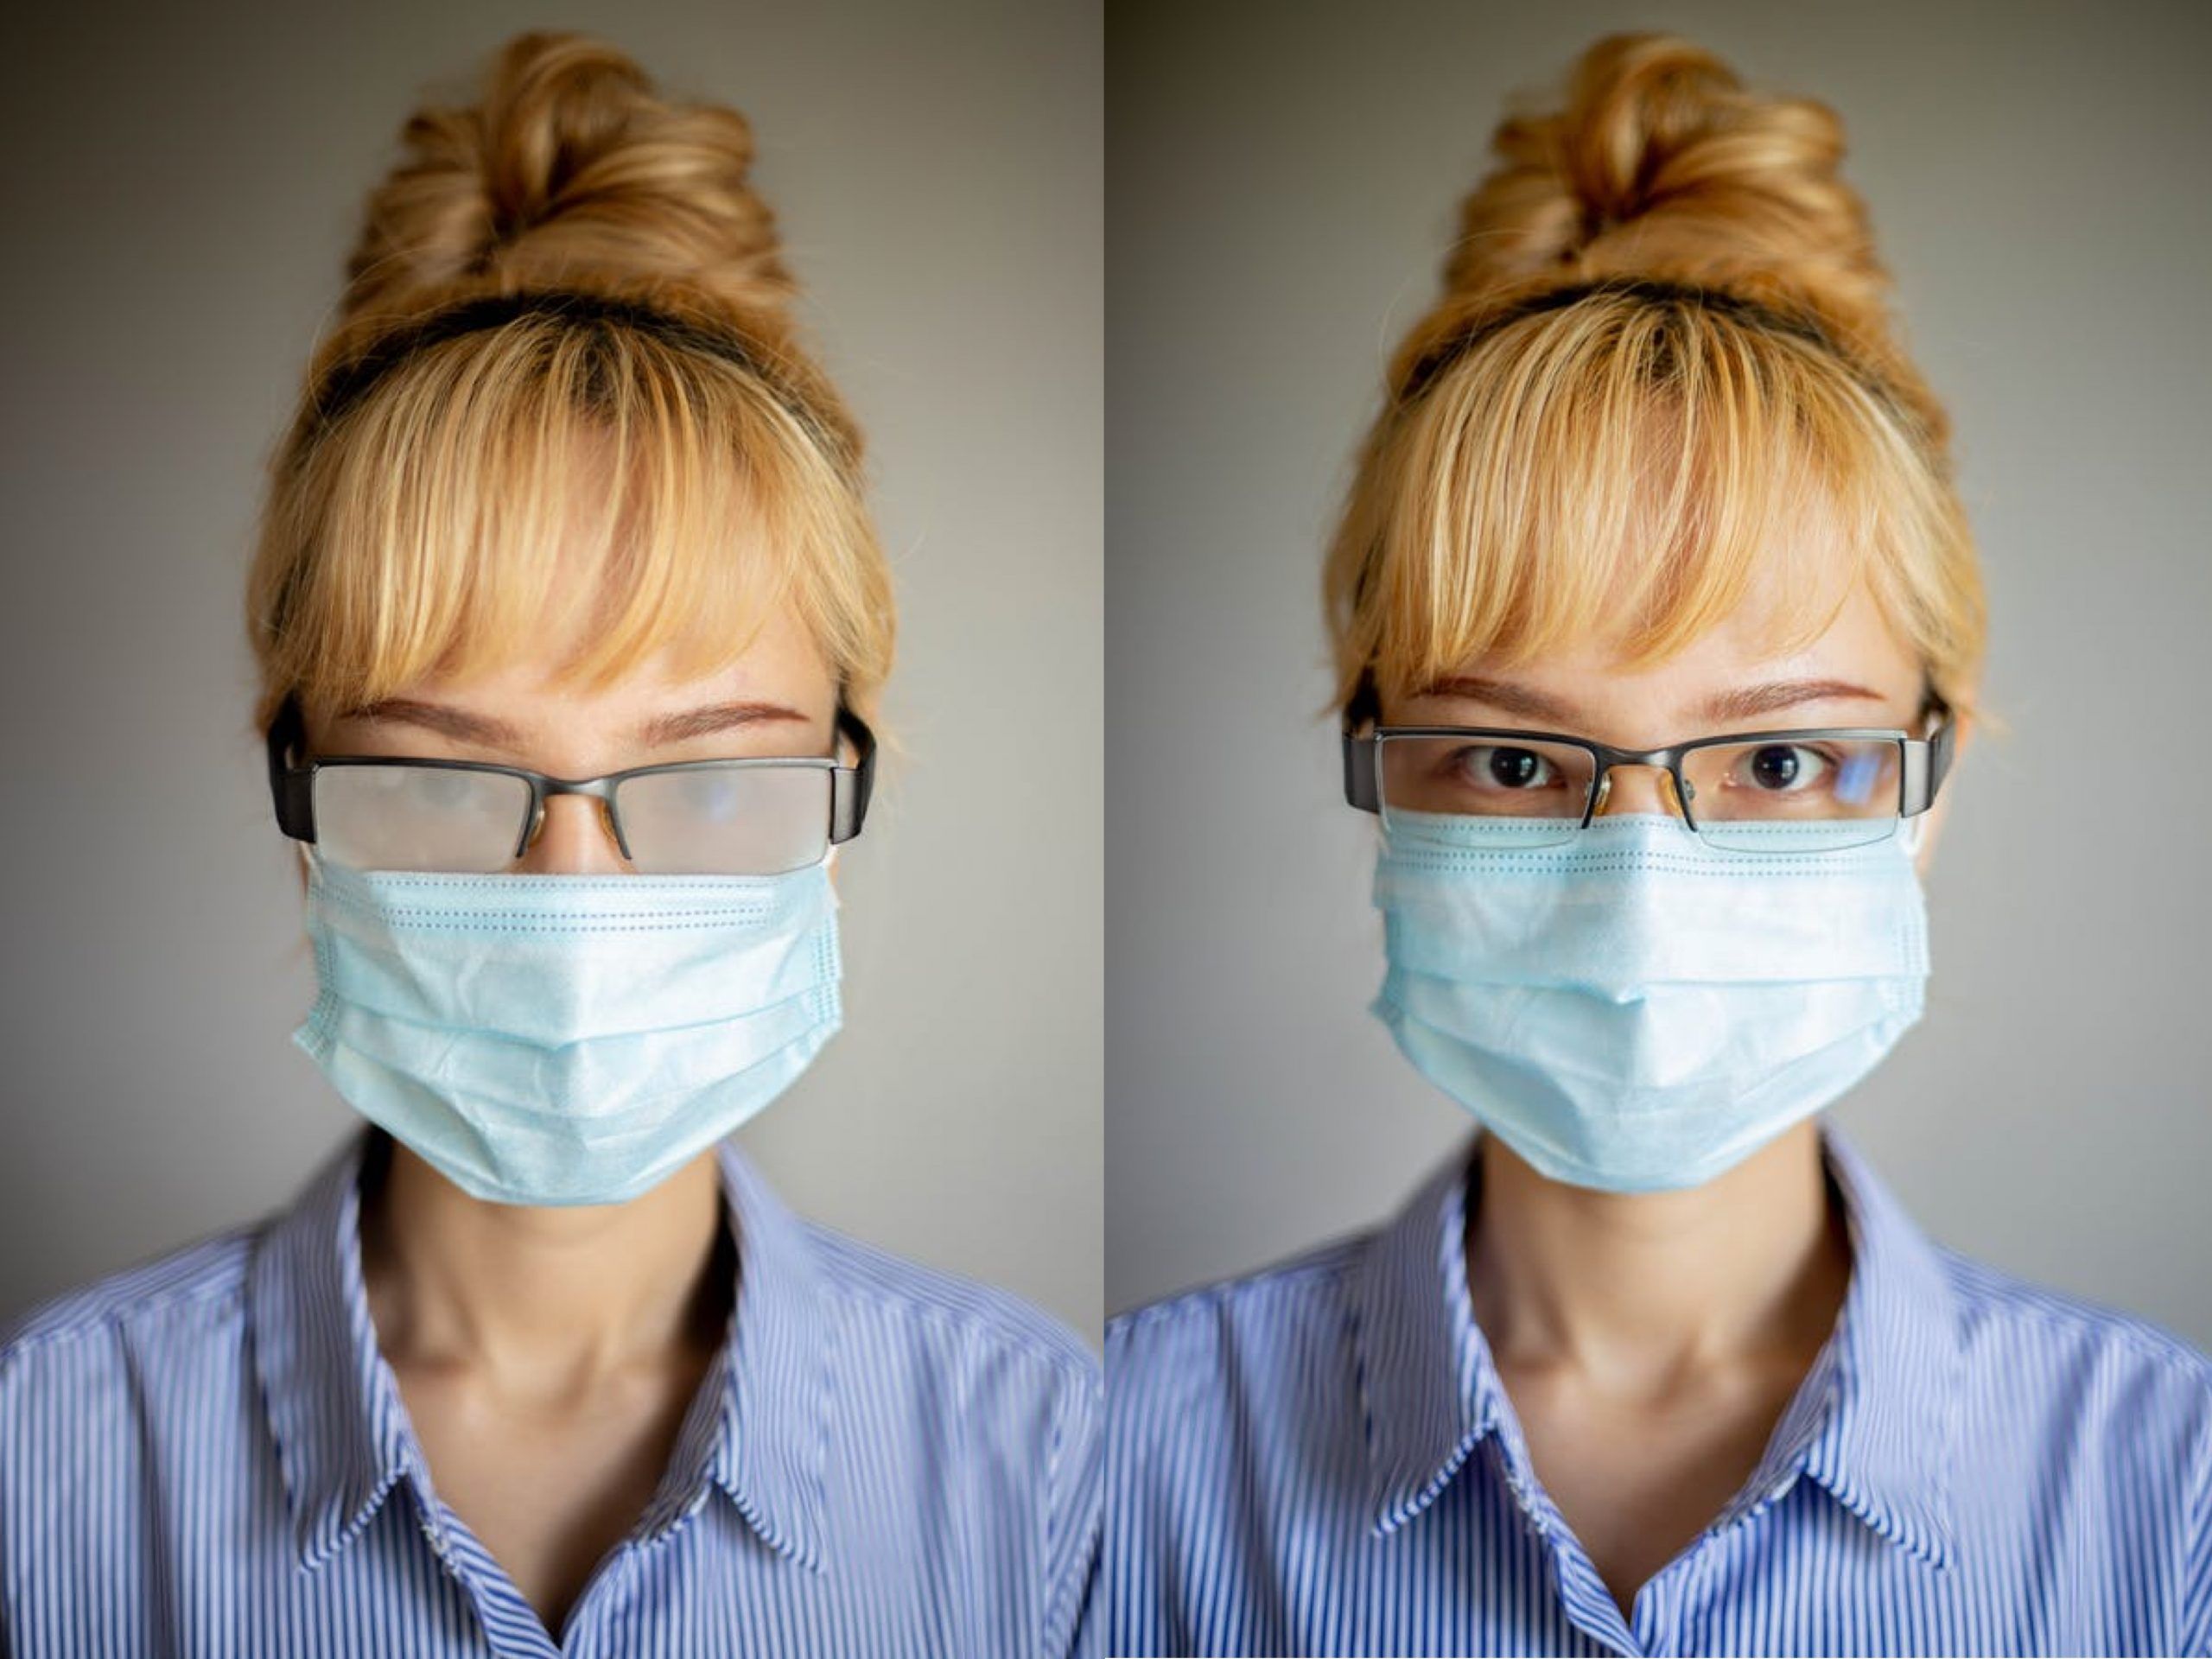 woman's glasses fogging up due to ill-fitting mask